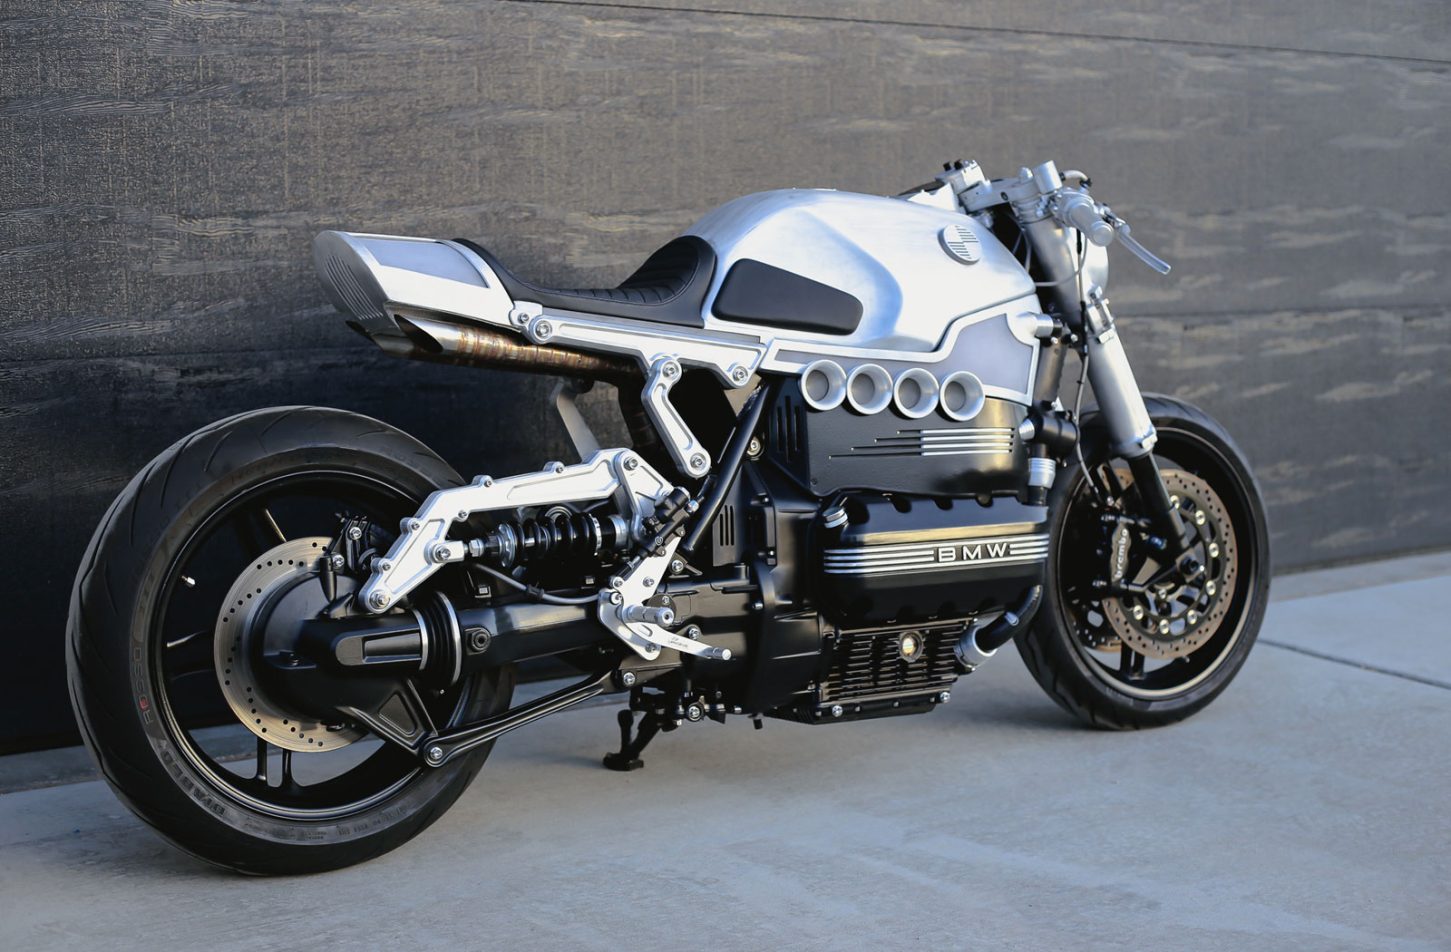 Shining Example – Mitch Witkamp’s BMW K1100LT Cafe Racer